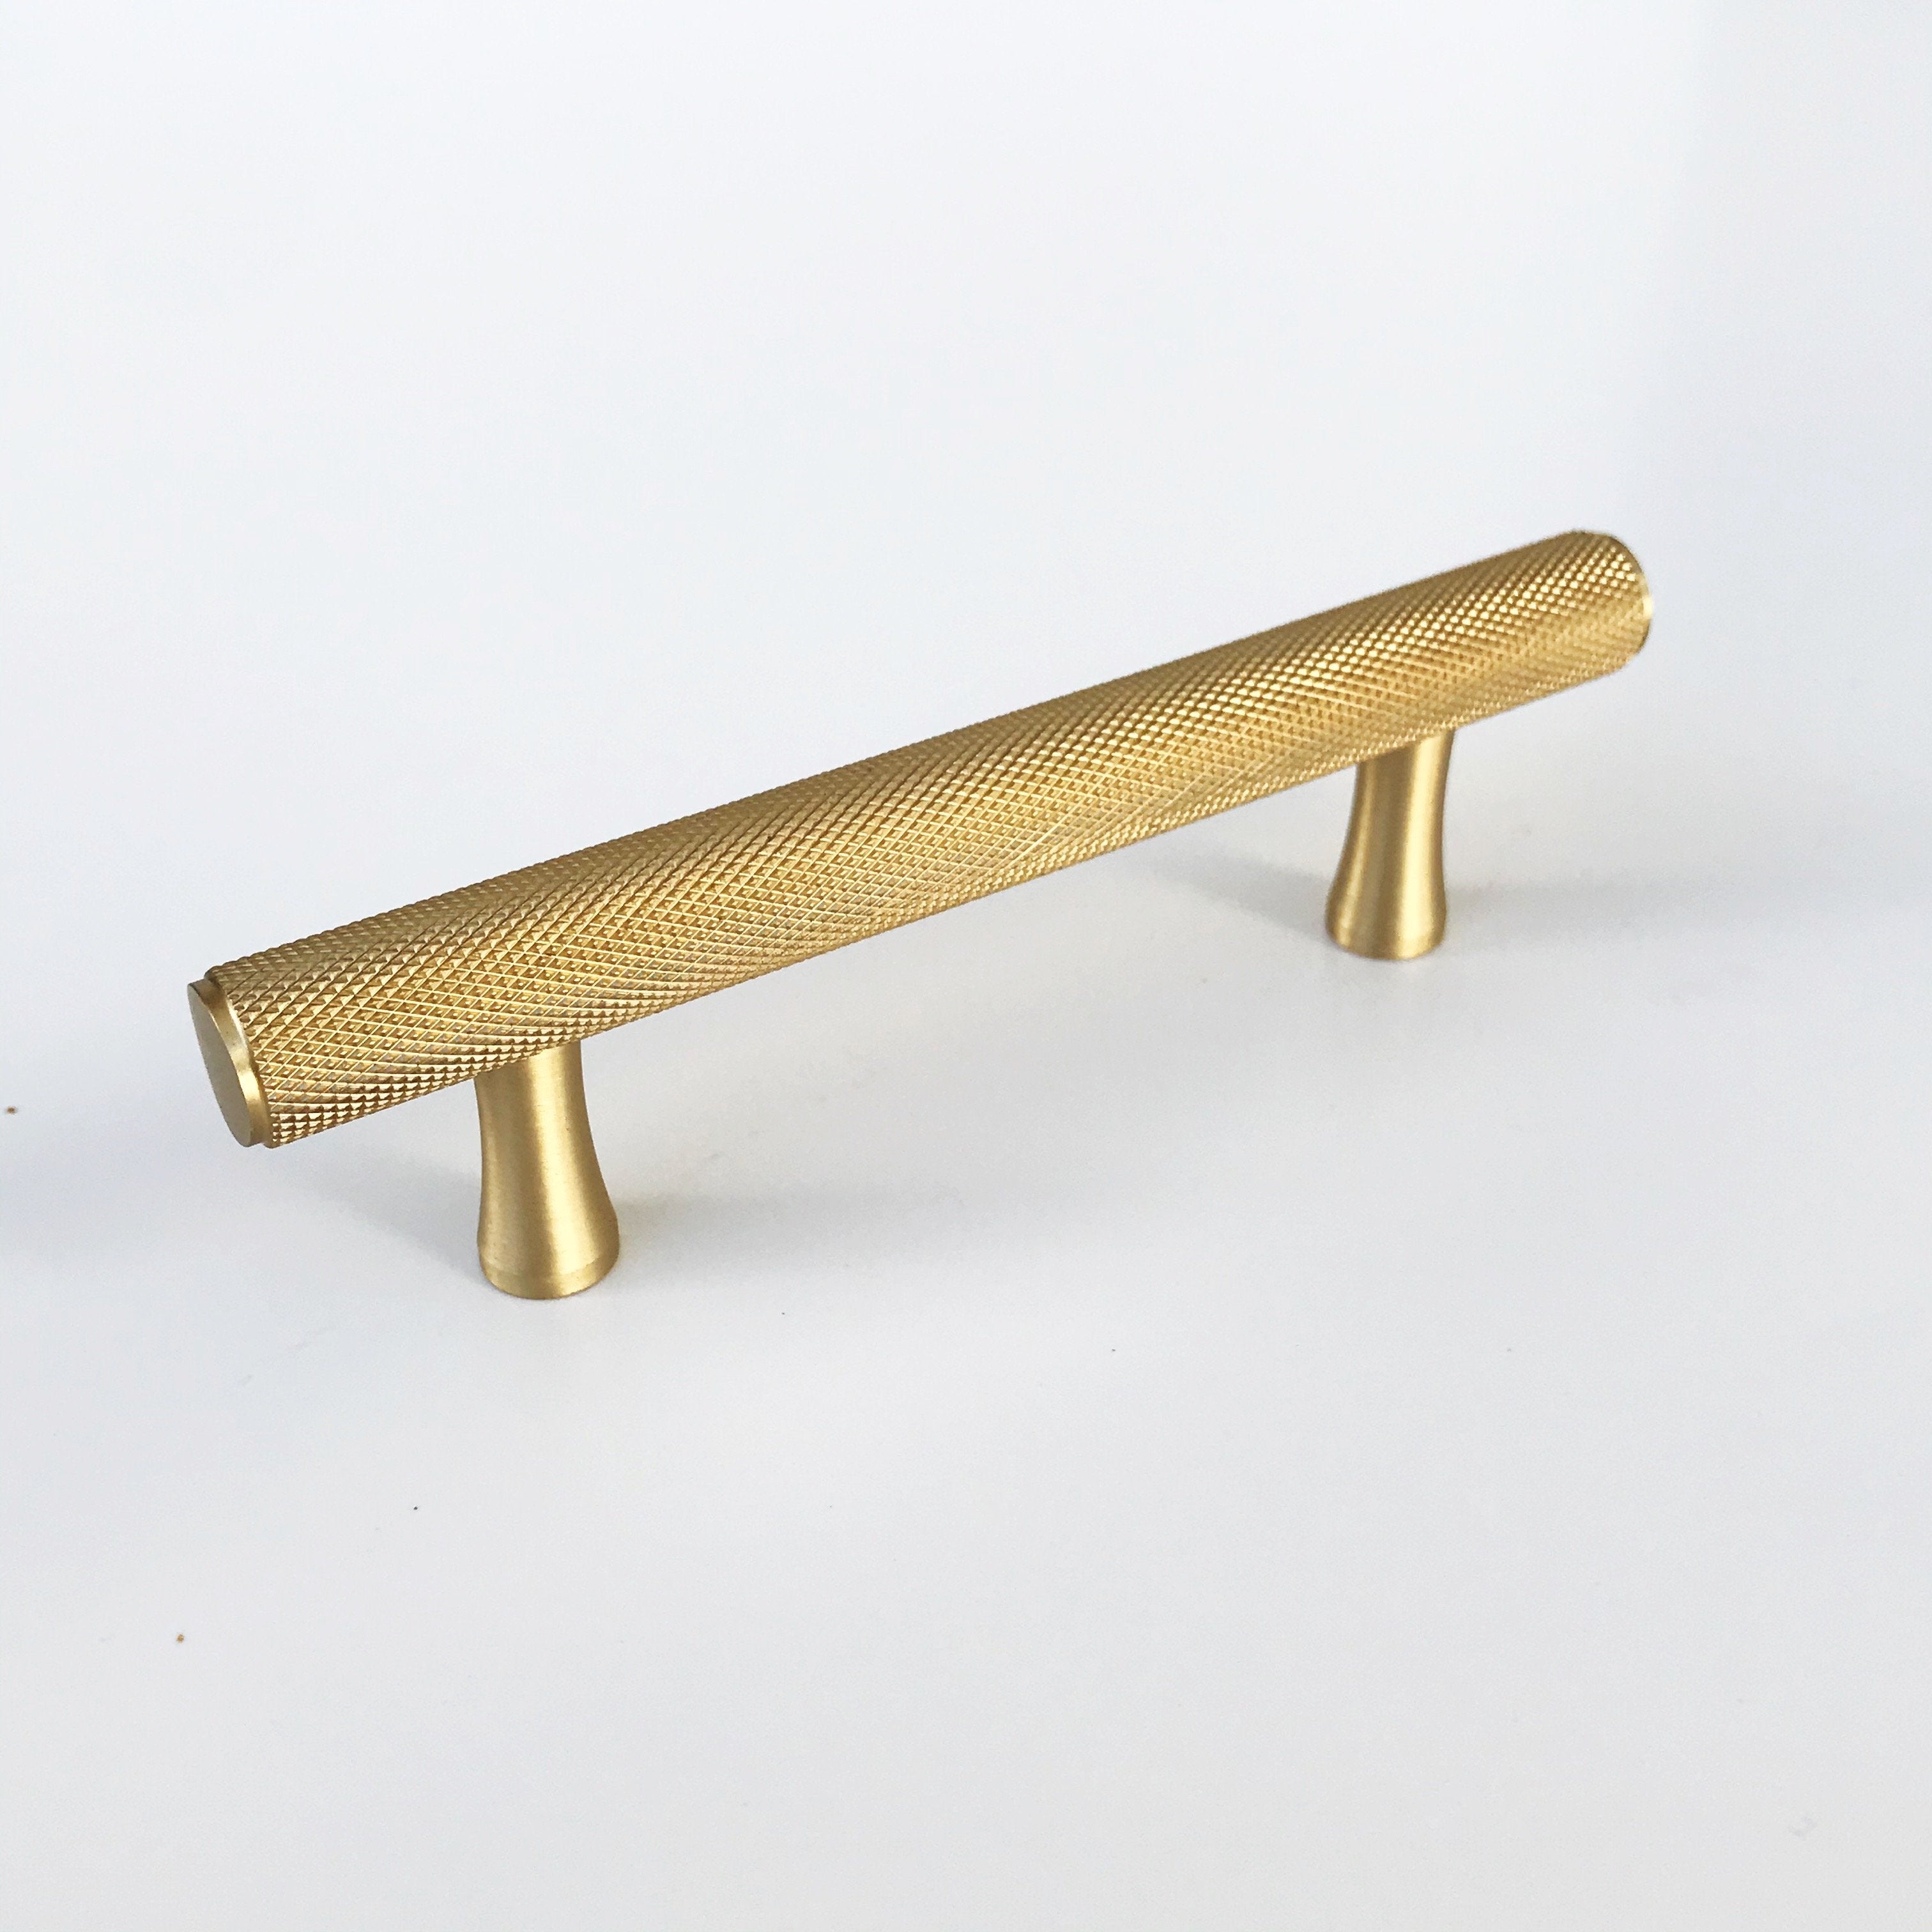 Brass Solid "Texture" Knurled Drawer Pulls and Knobs in Satin Brass | Pulls